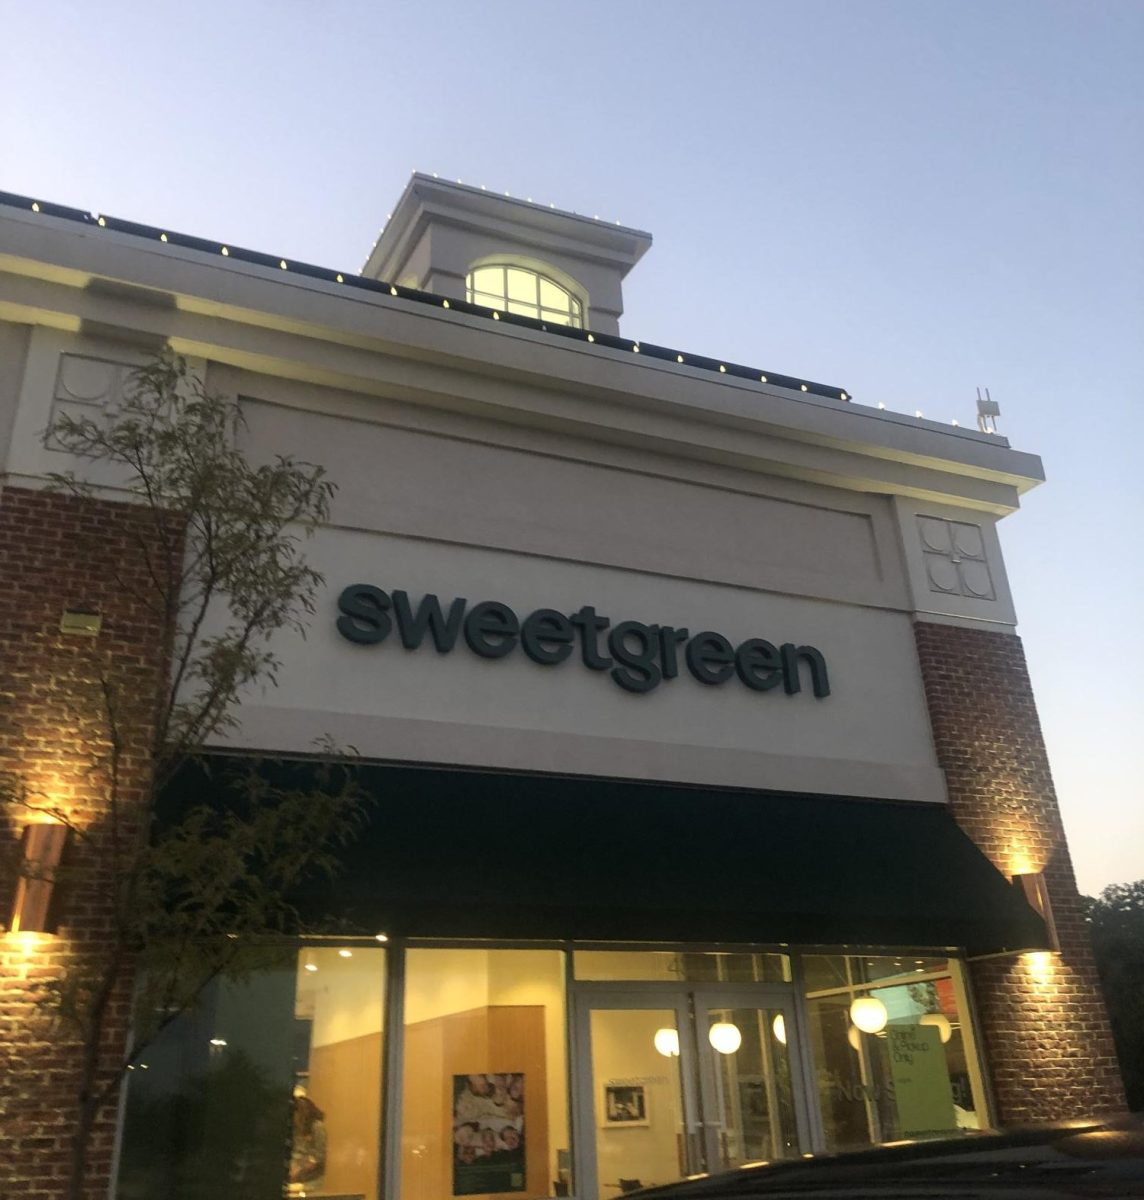 This+past+summer%2C+Sweetgreen+opened+its+doors+in+their+new+location+in+Deer+Park.+Sweetgreen+is+known+for+their+varieties+of+delicious+salads.